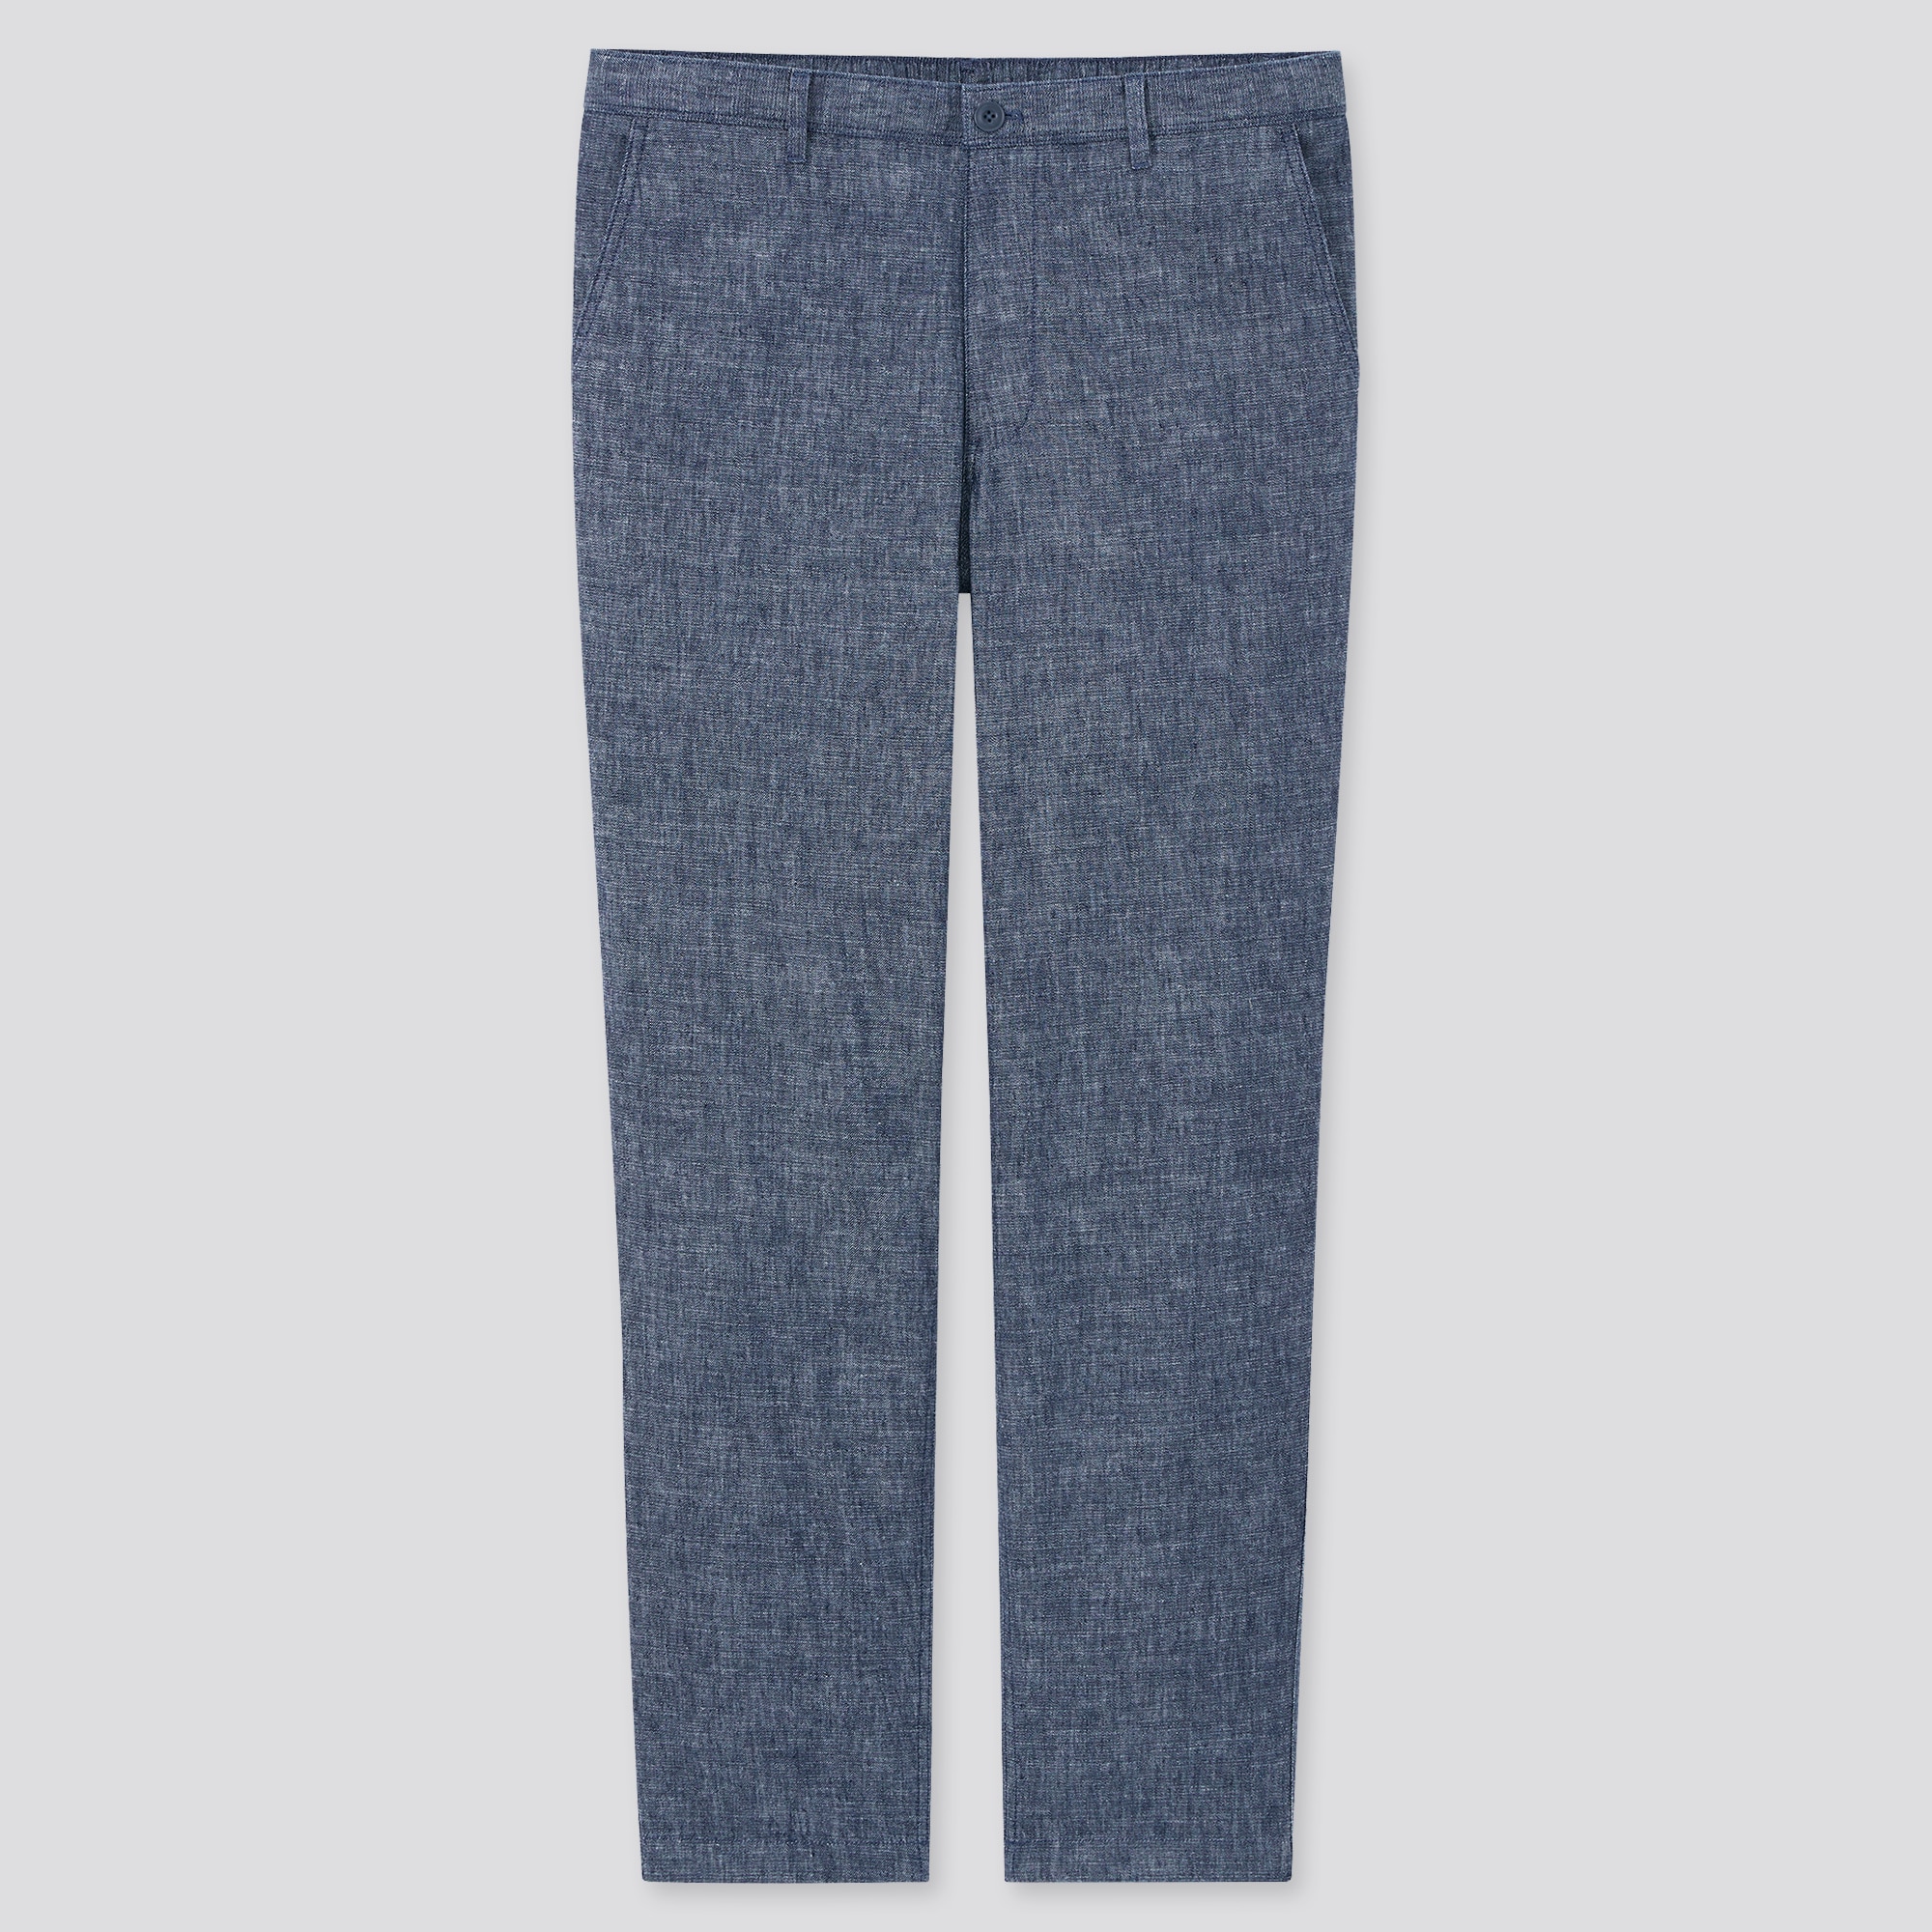 Sustainable Men's Linen Trousers | Ethical Clothing